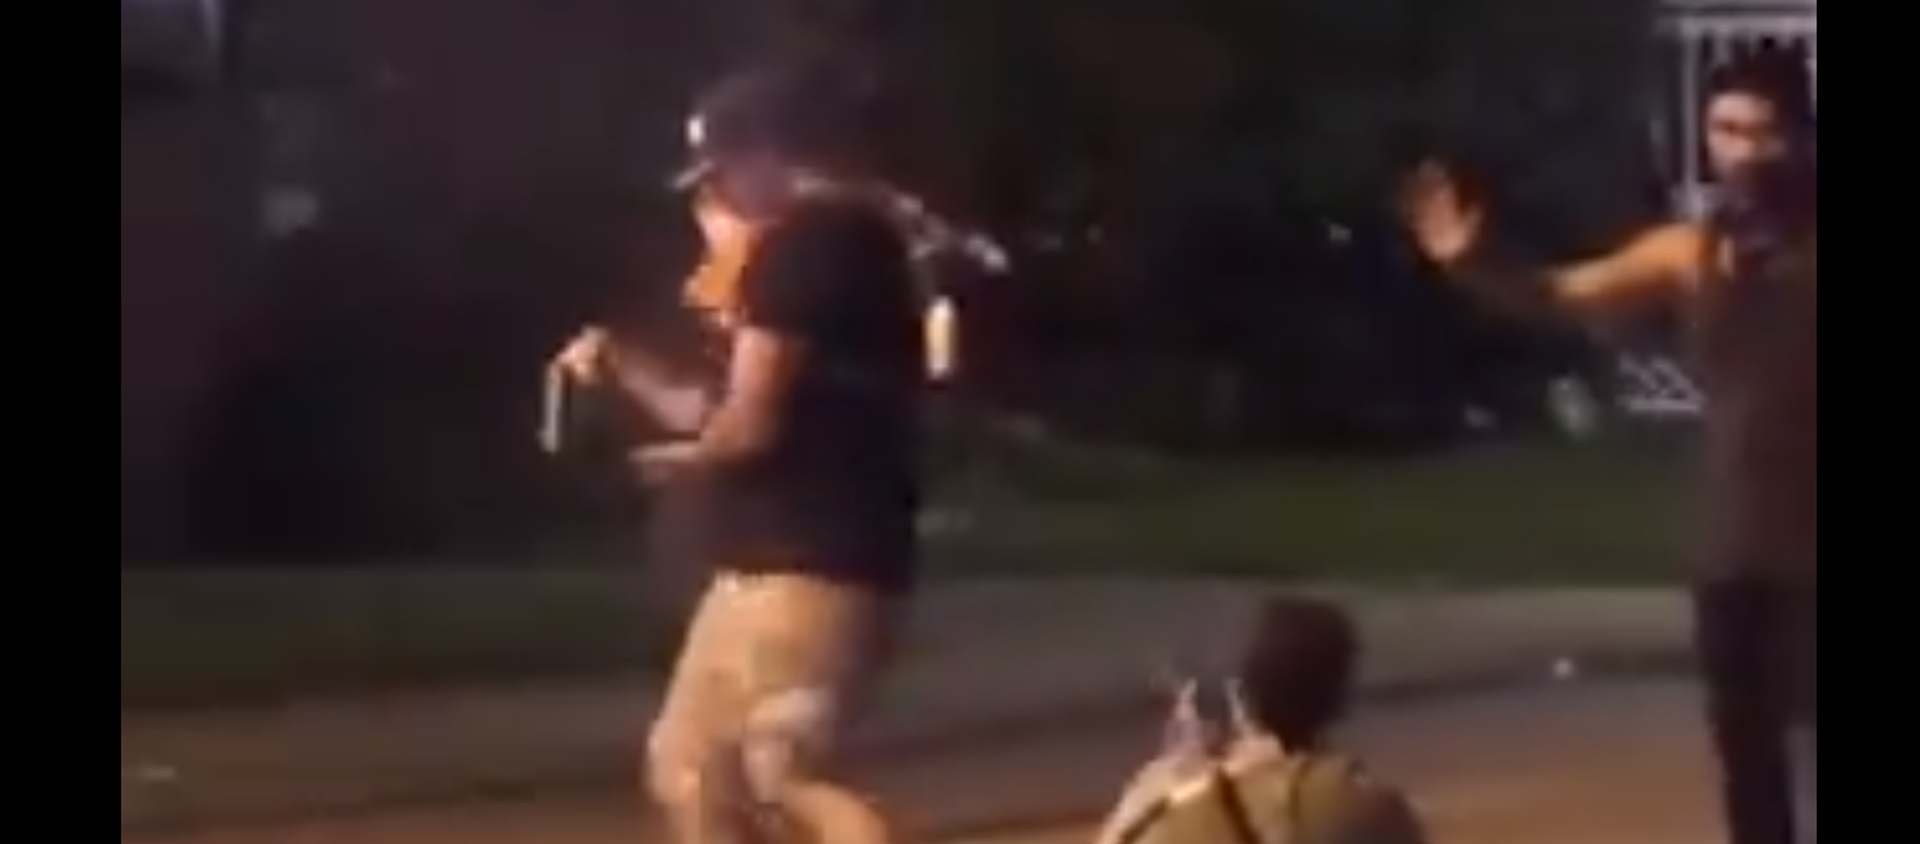 Screenshot from a video showing Kyle Rittenhouse shooting Gaige Grosskreutz, who has a gun in his hand, during protests in Kenosha, Wisconsin - Sputnik International, 1920, 23.09.2020